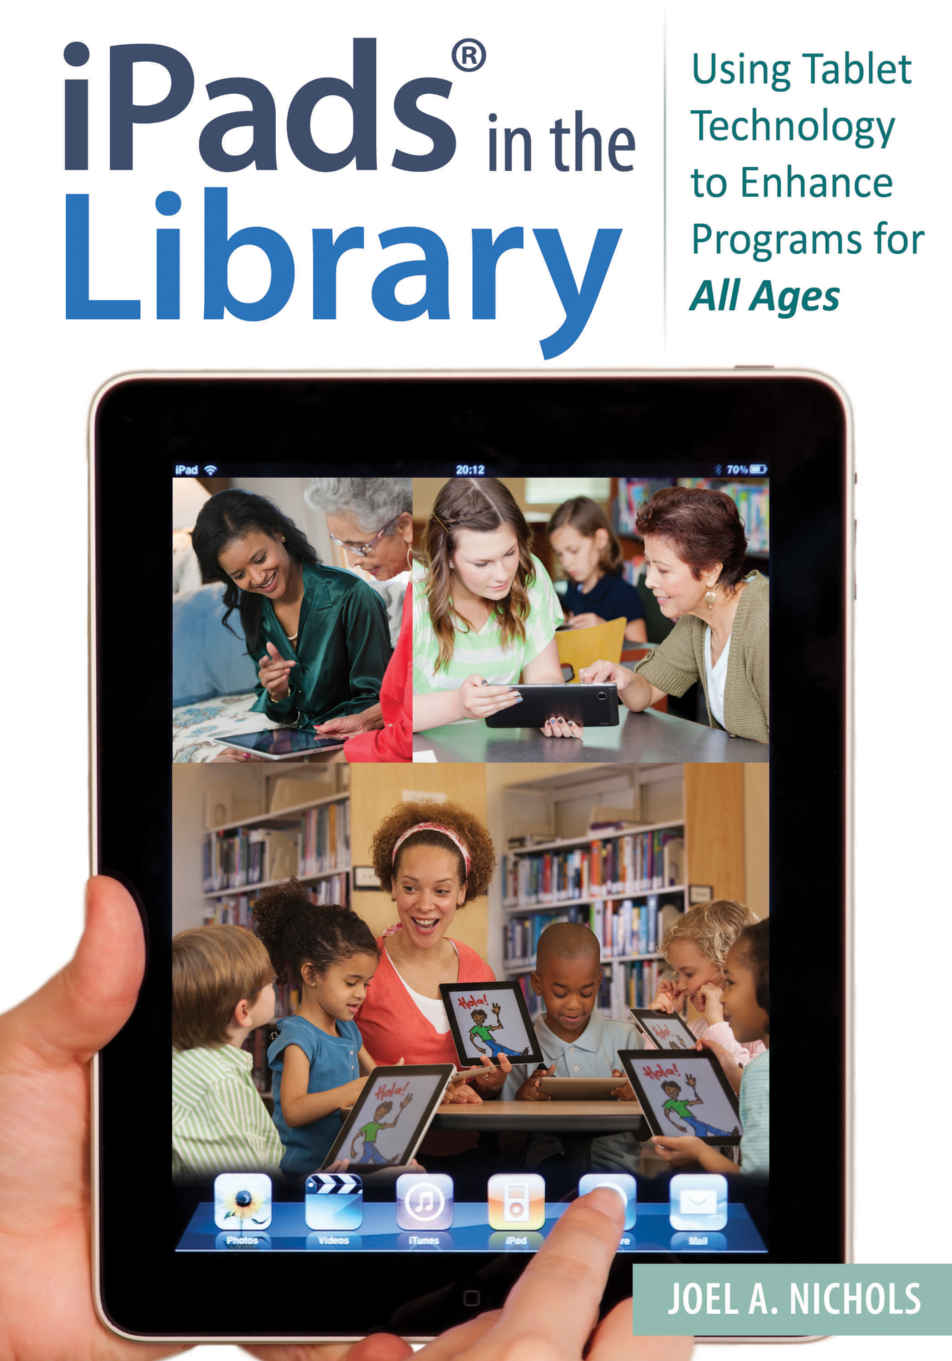 iPads® in the Library: Using Tablet Technology to Enhance Programs for All Ages page Cover1